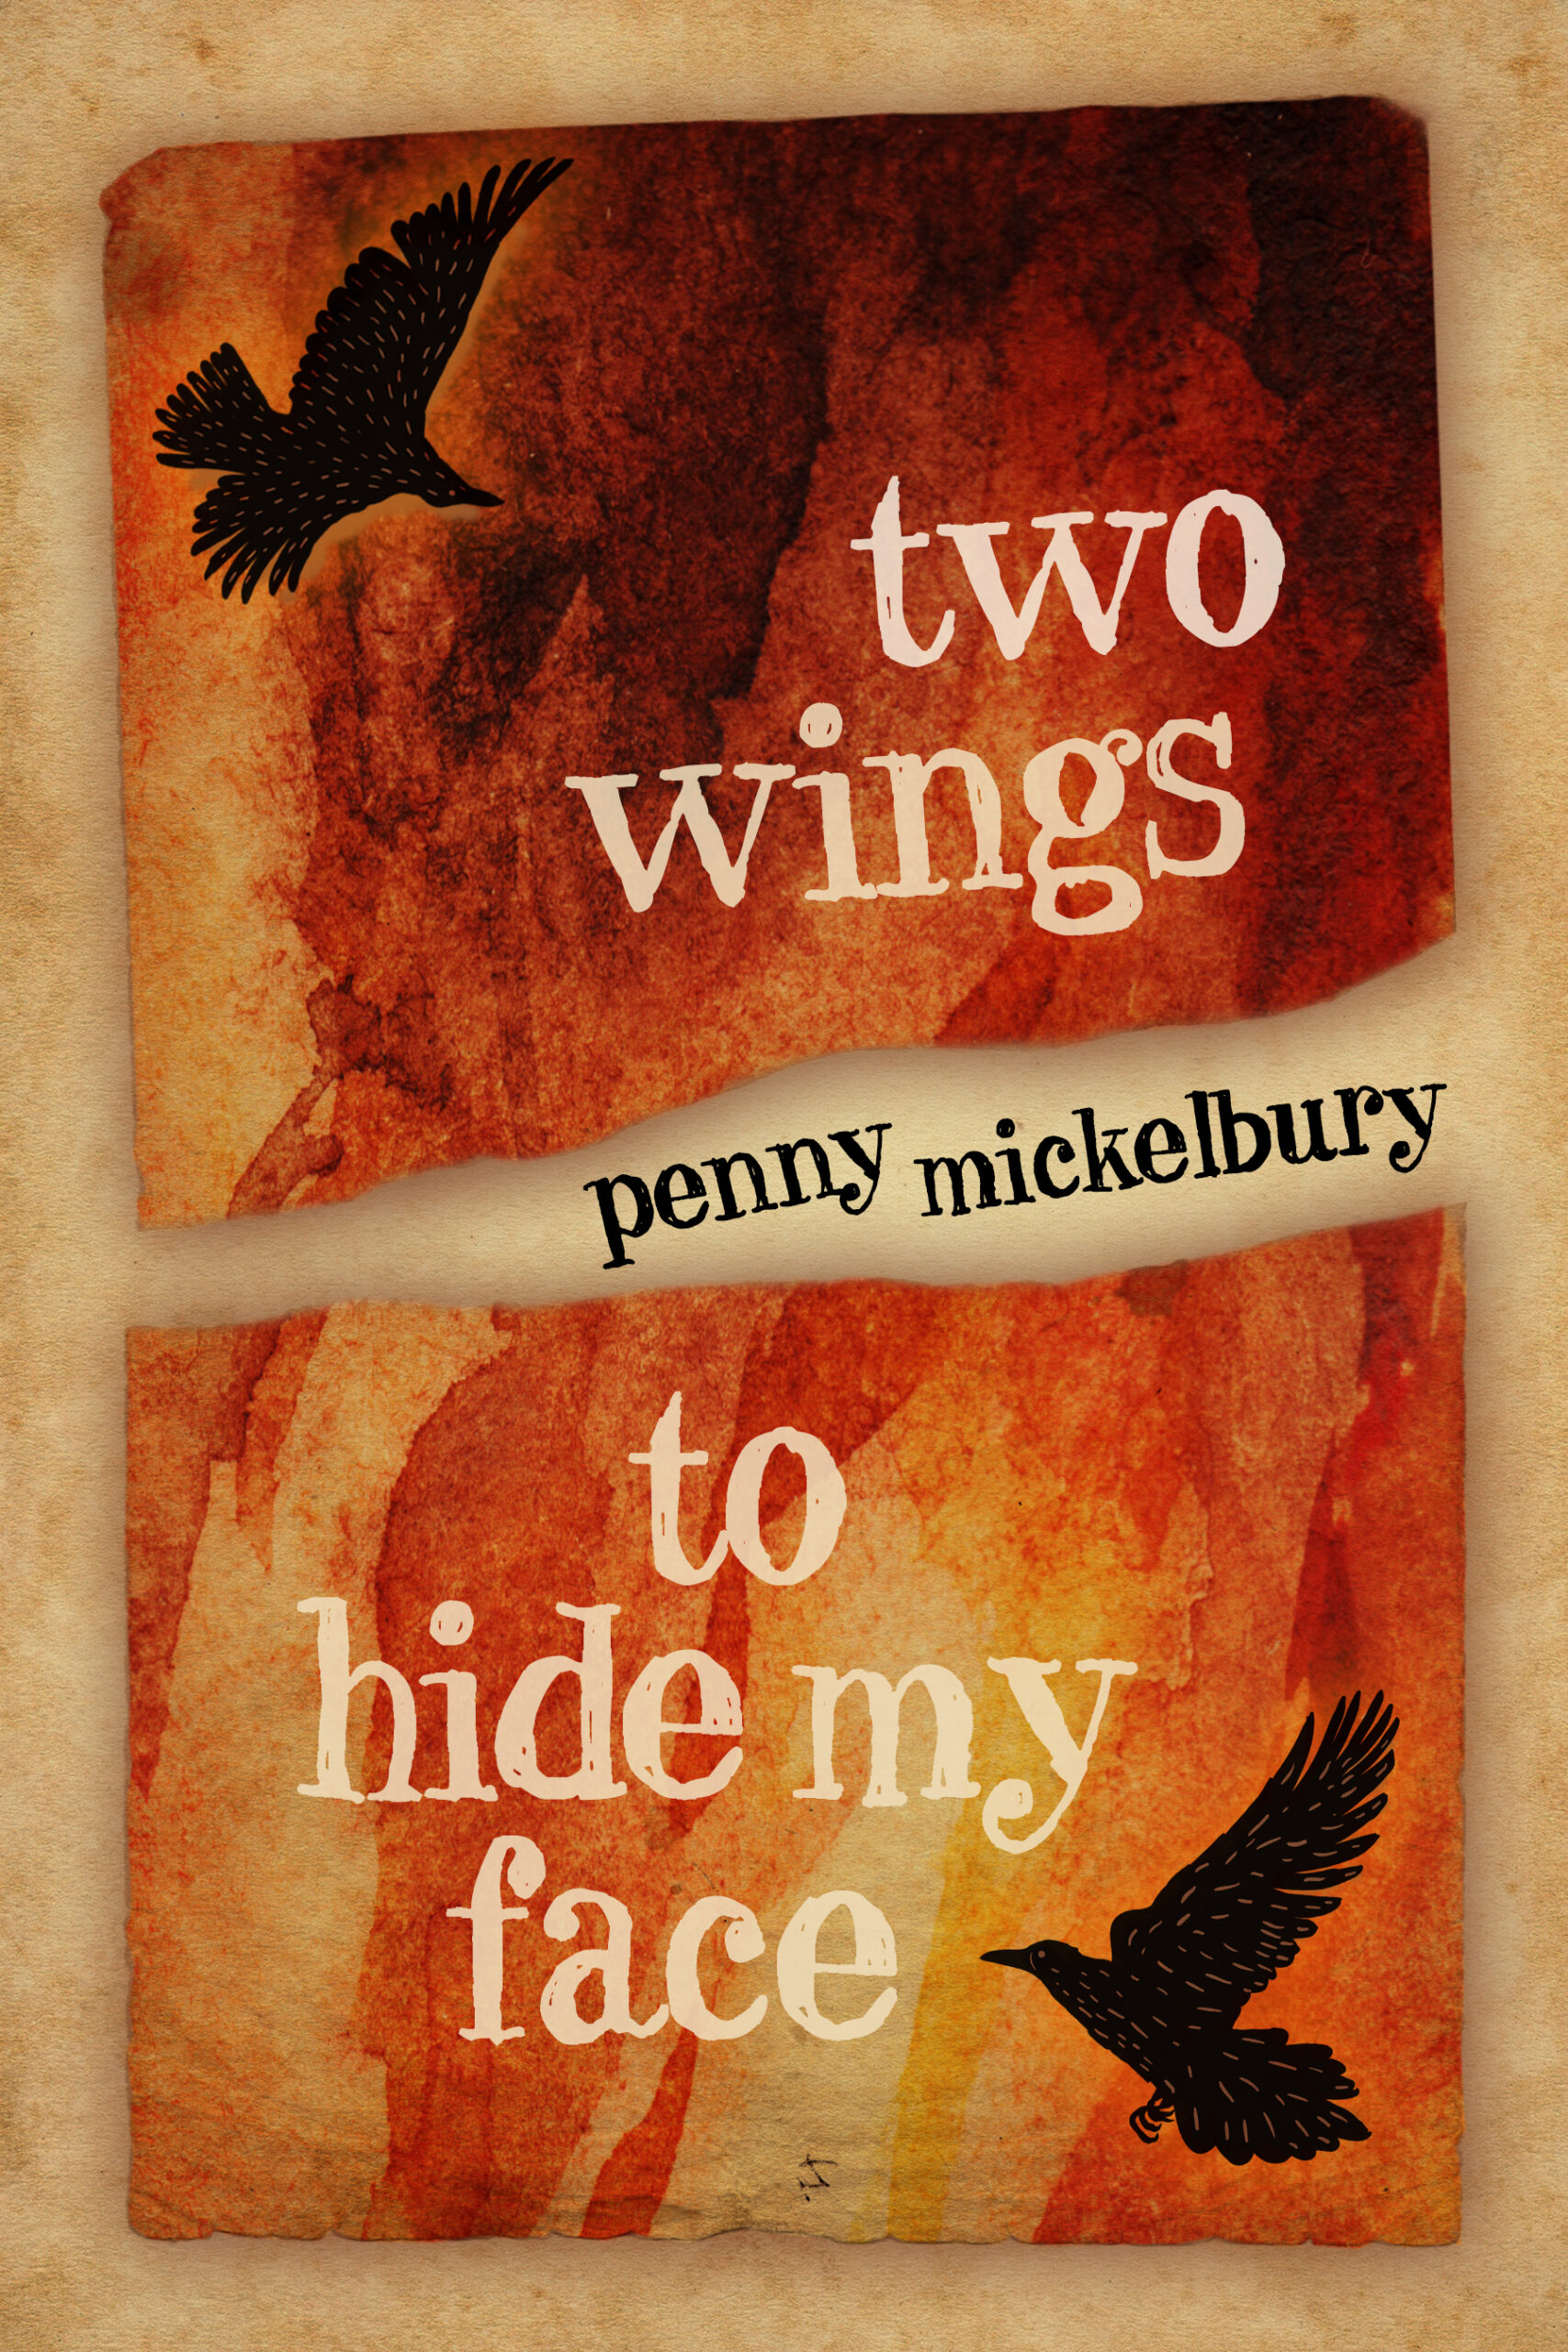 Hide　Face　Wings　Bywater　My　Mickelbury　Books　by　to　Two　Penny